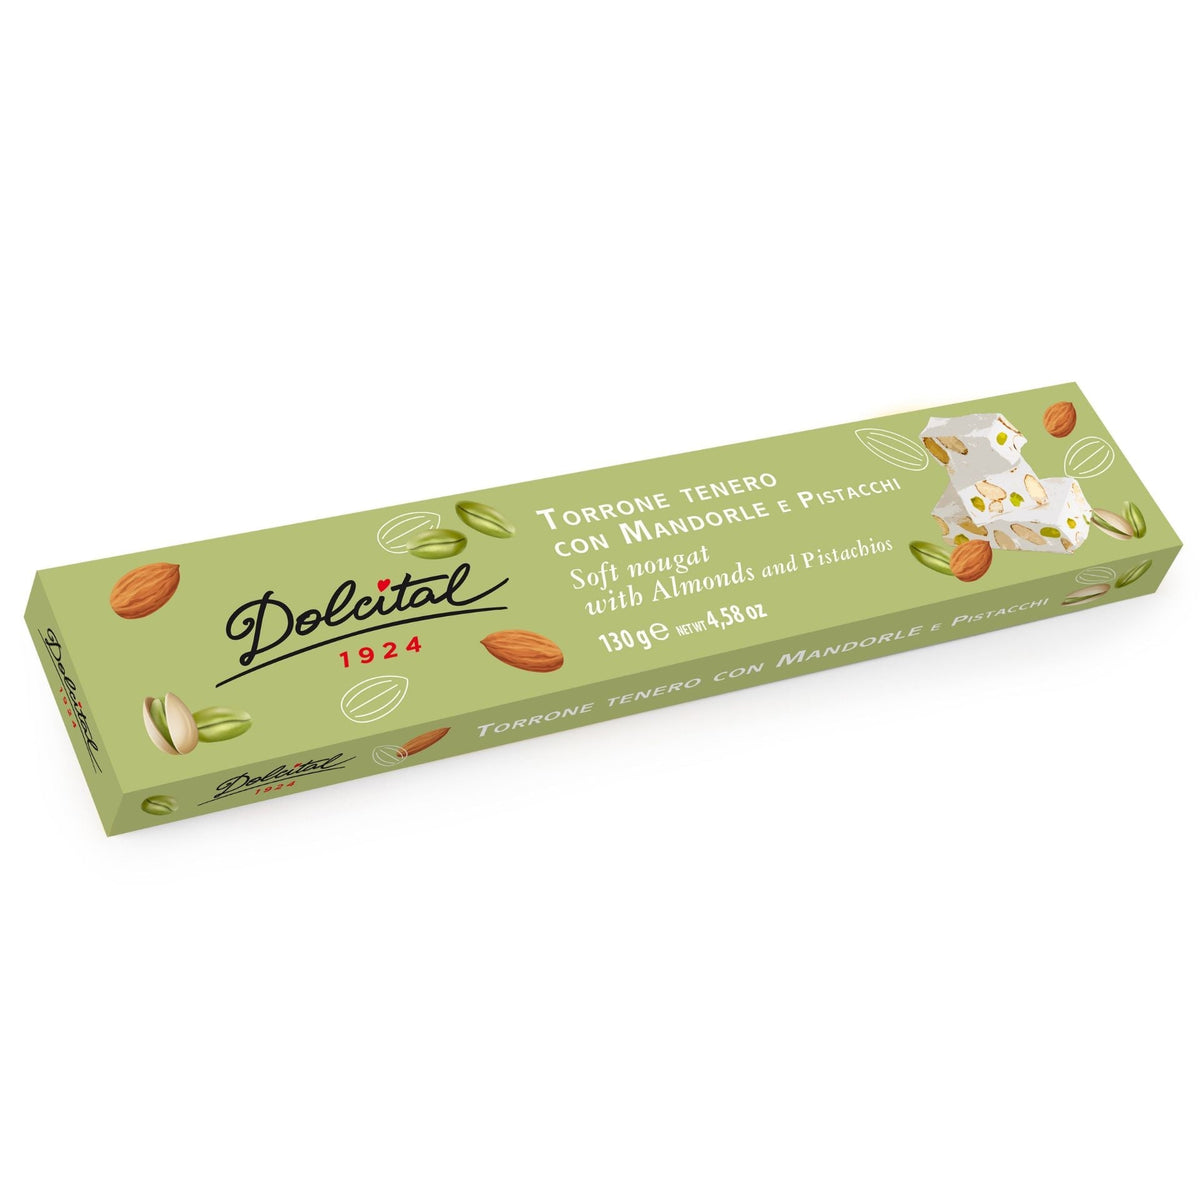 Dolcital Almond &amp; Pistachio Soft Nougat 130g (Box)  | Imported and distributed in the UK by Just Gourmet Foods